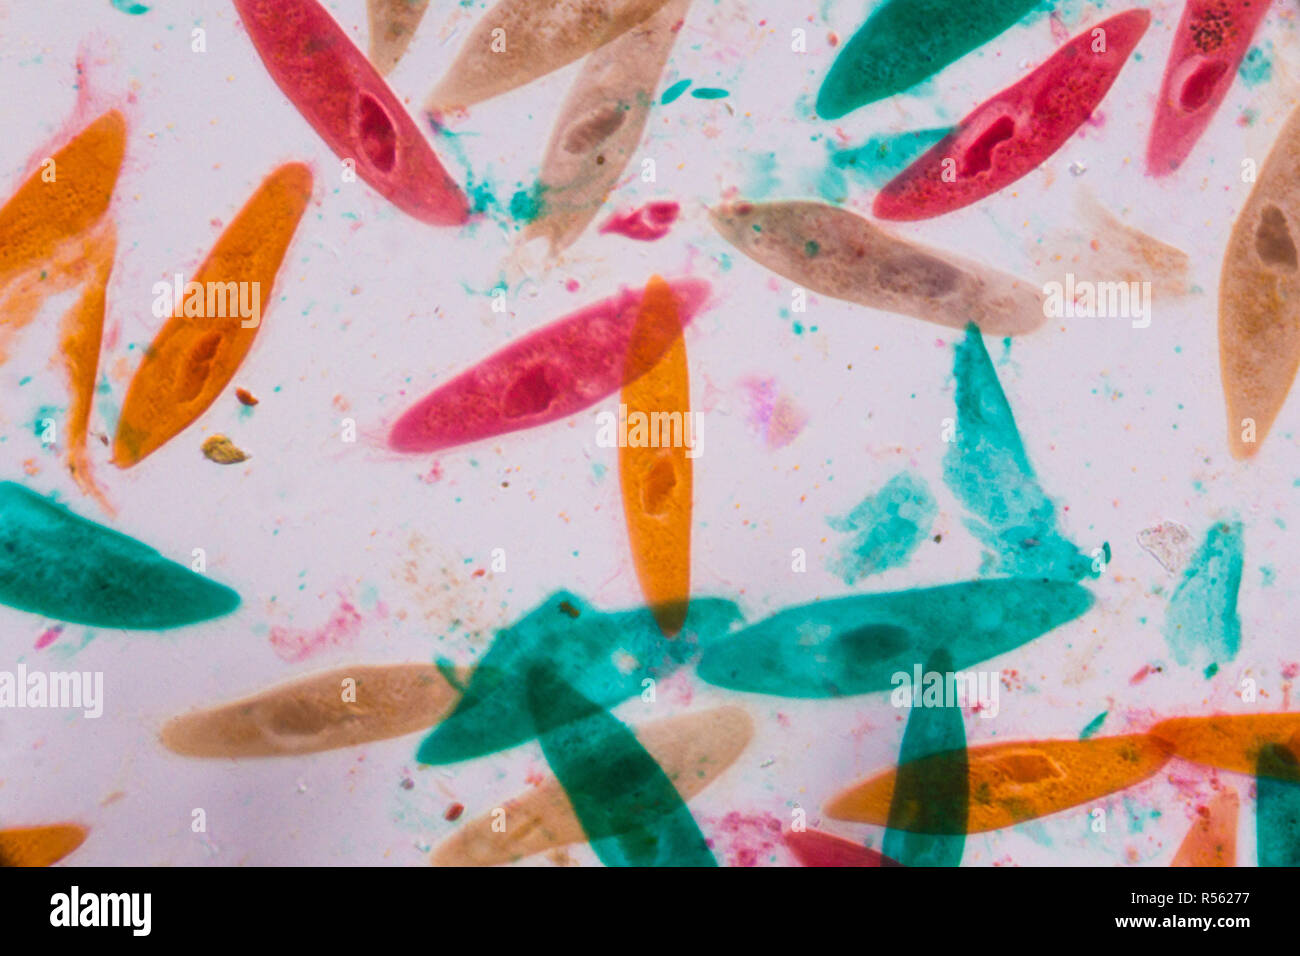 Paramecium caudatum under the microscope - Abstract shapes in color of green, red, orange and brown on white background Stock Photo